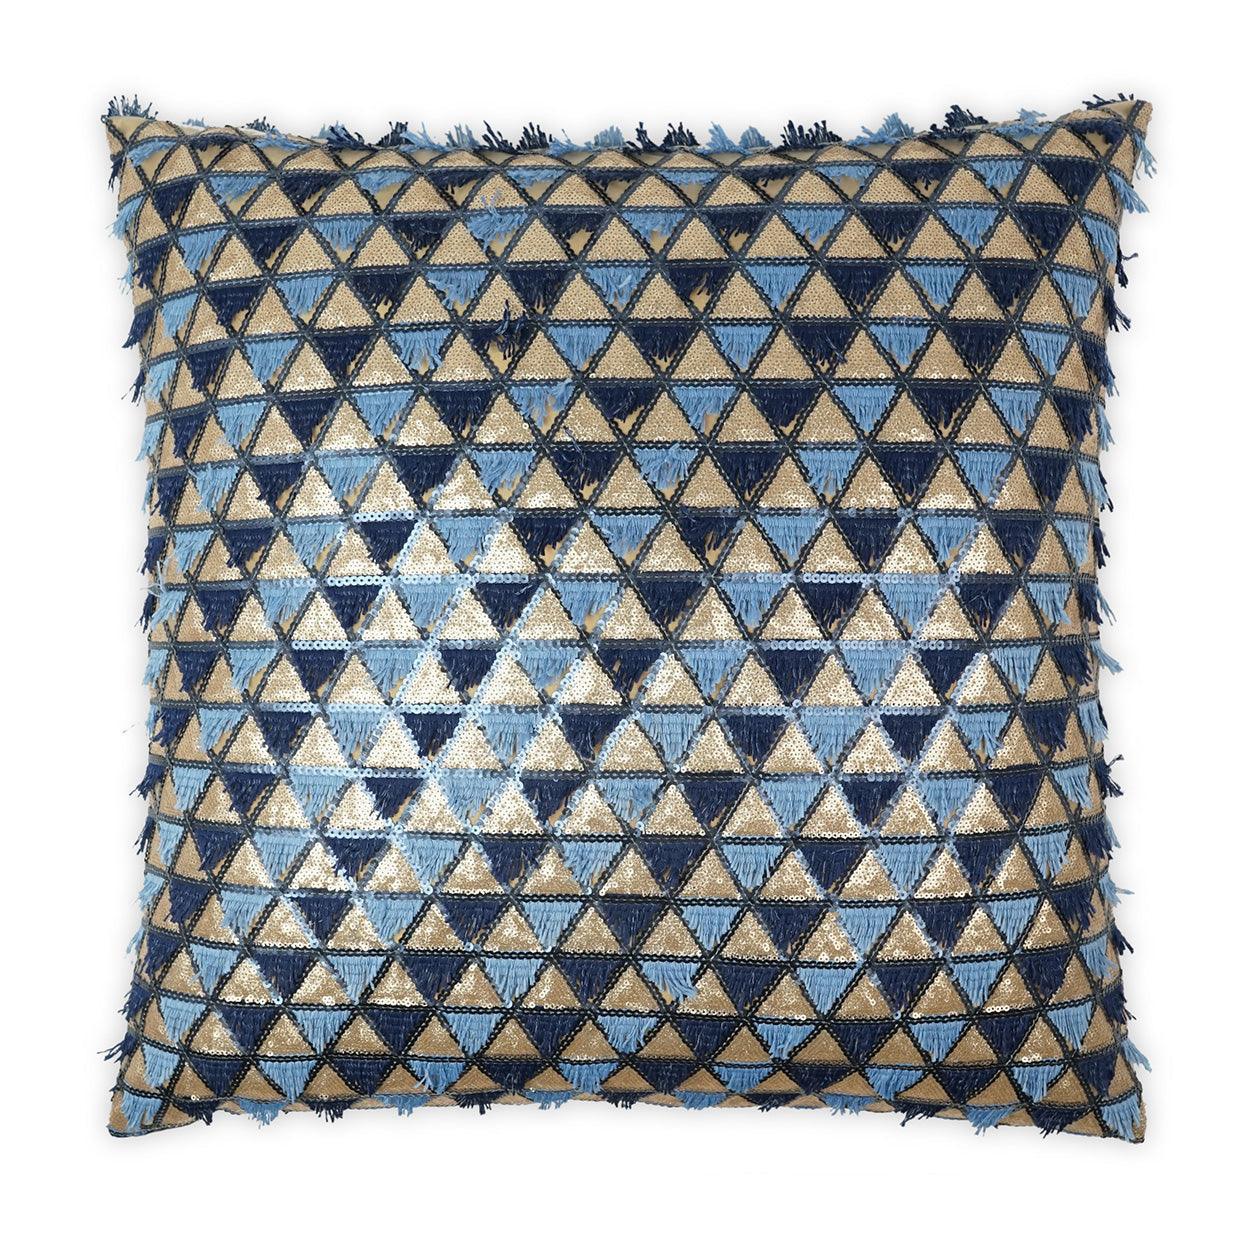 Wink Embroidery Glam Textured Geometric Blue Large Throw Pillow With Insert - Uptown Sebastian